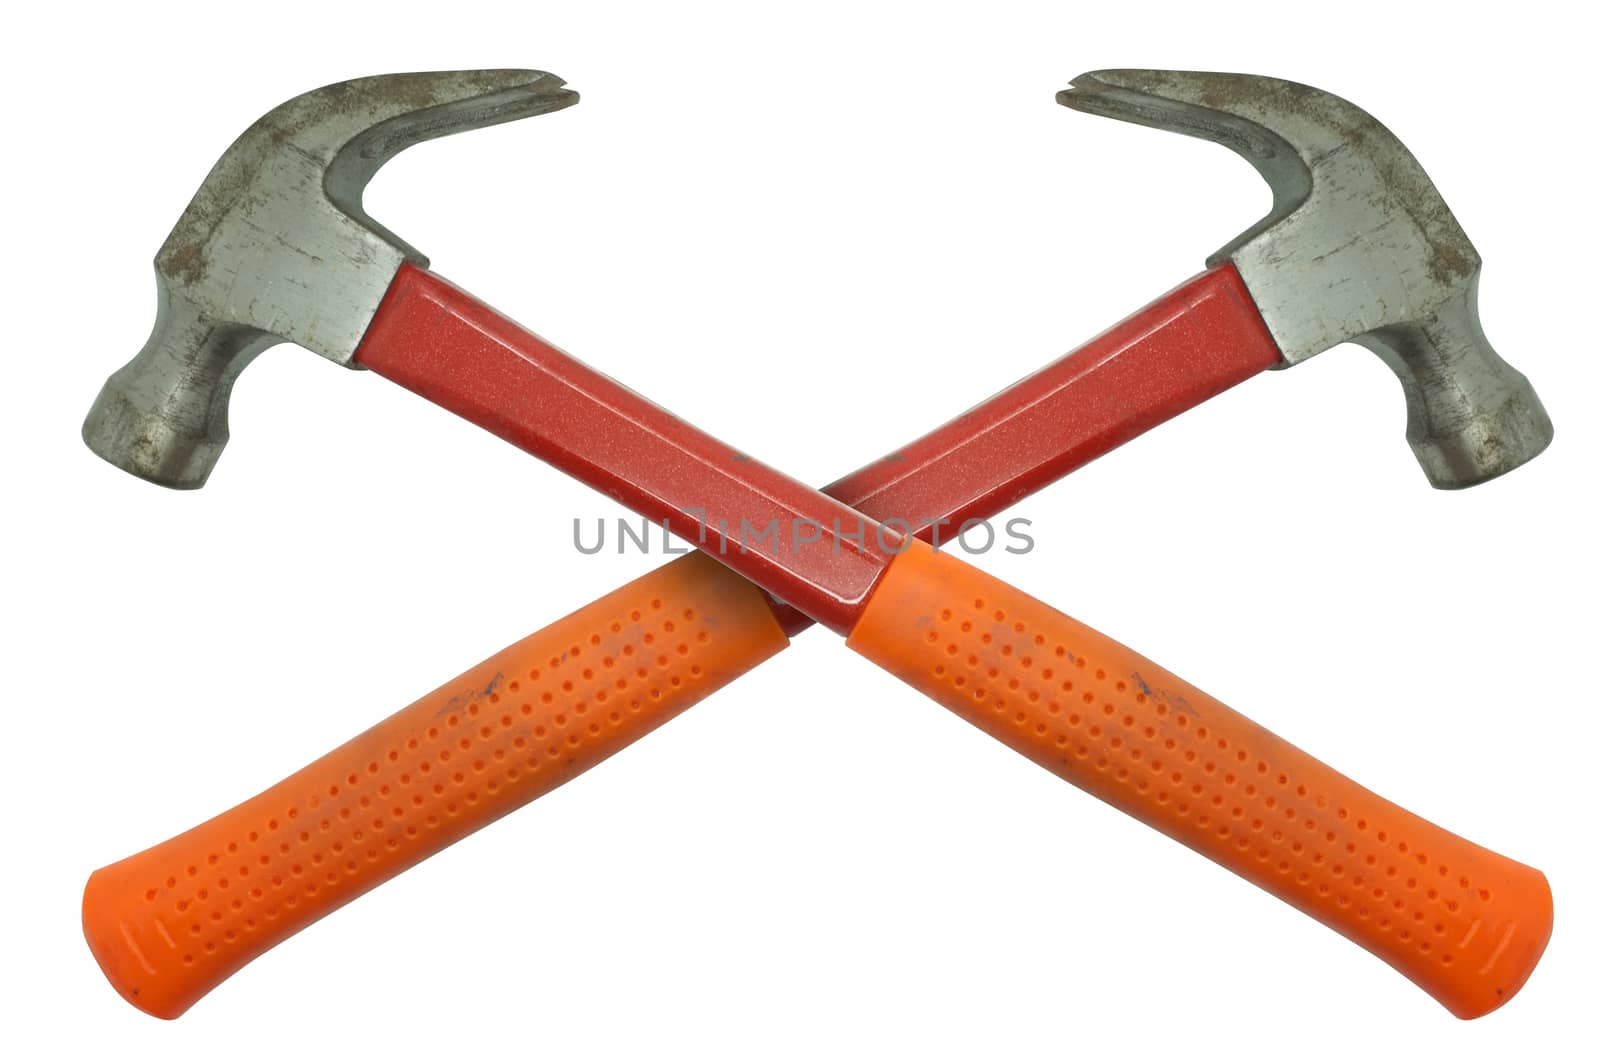 Orange and red metal hammer isolated on white background